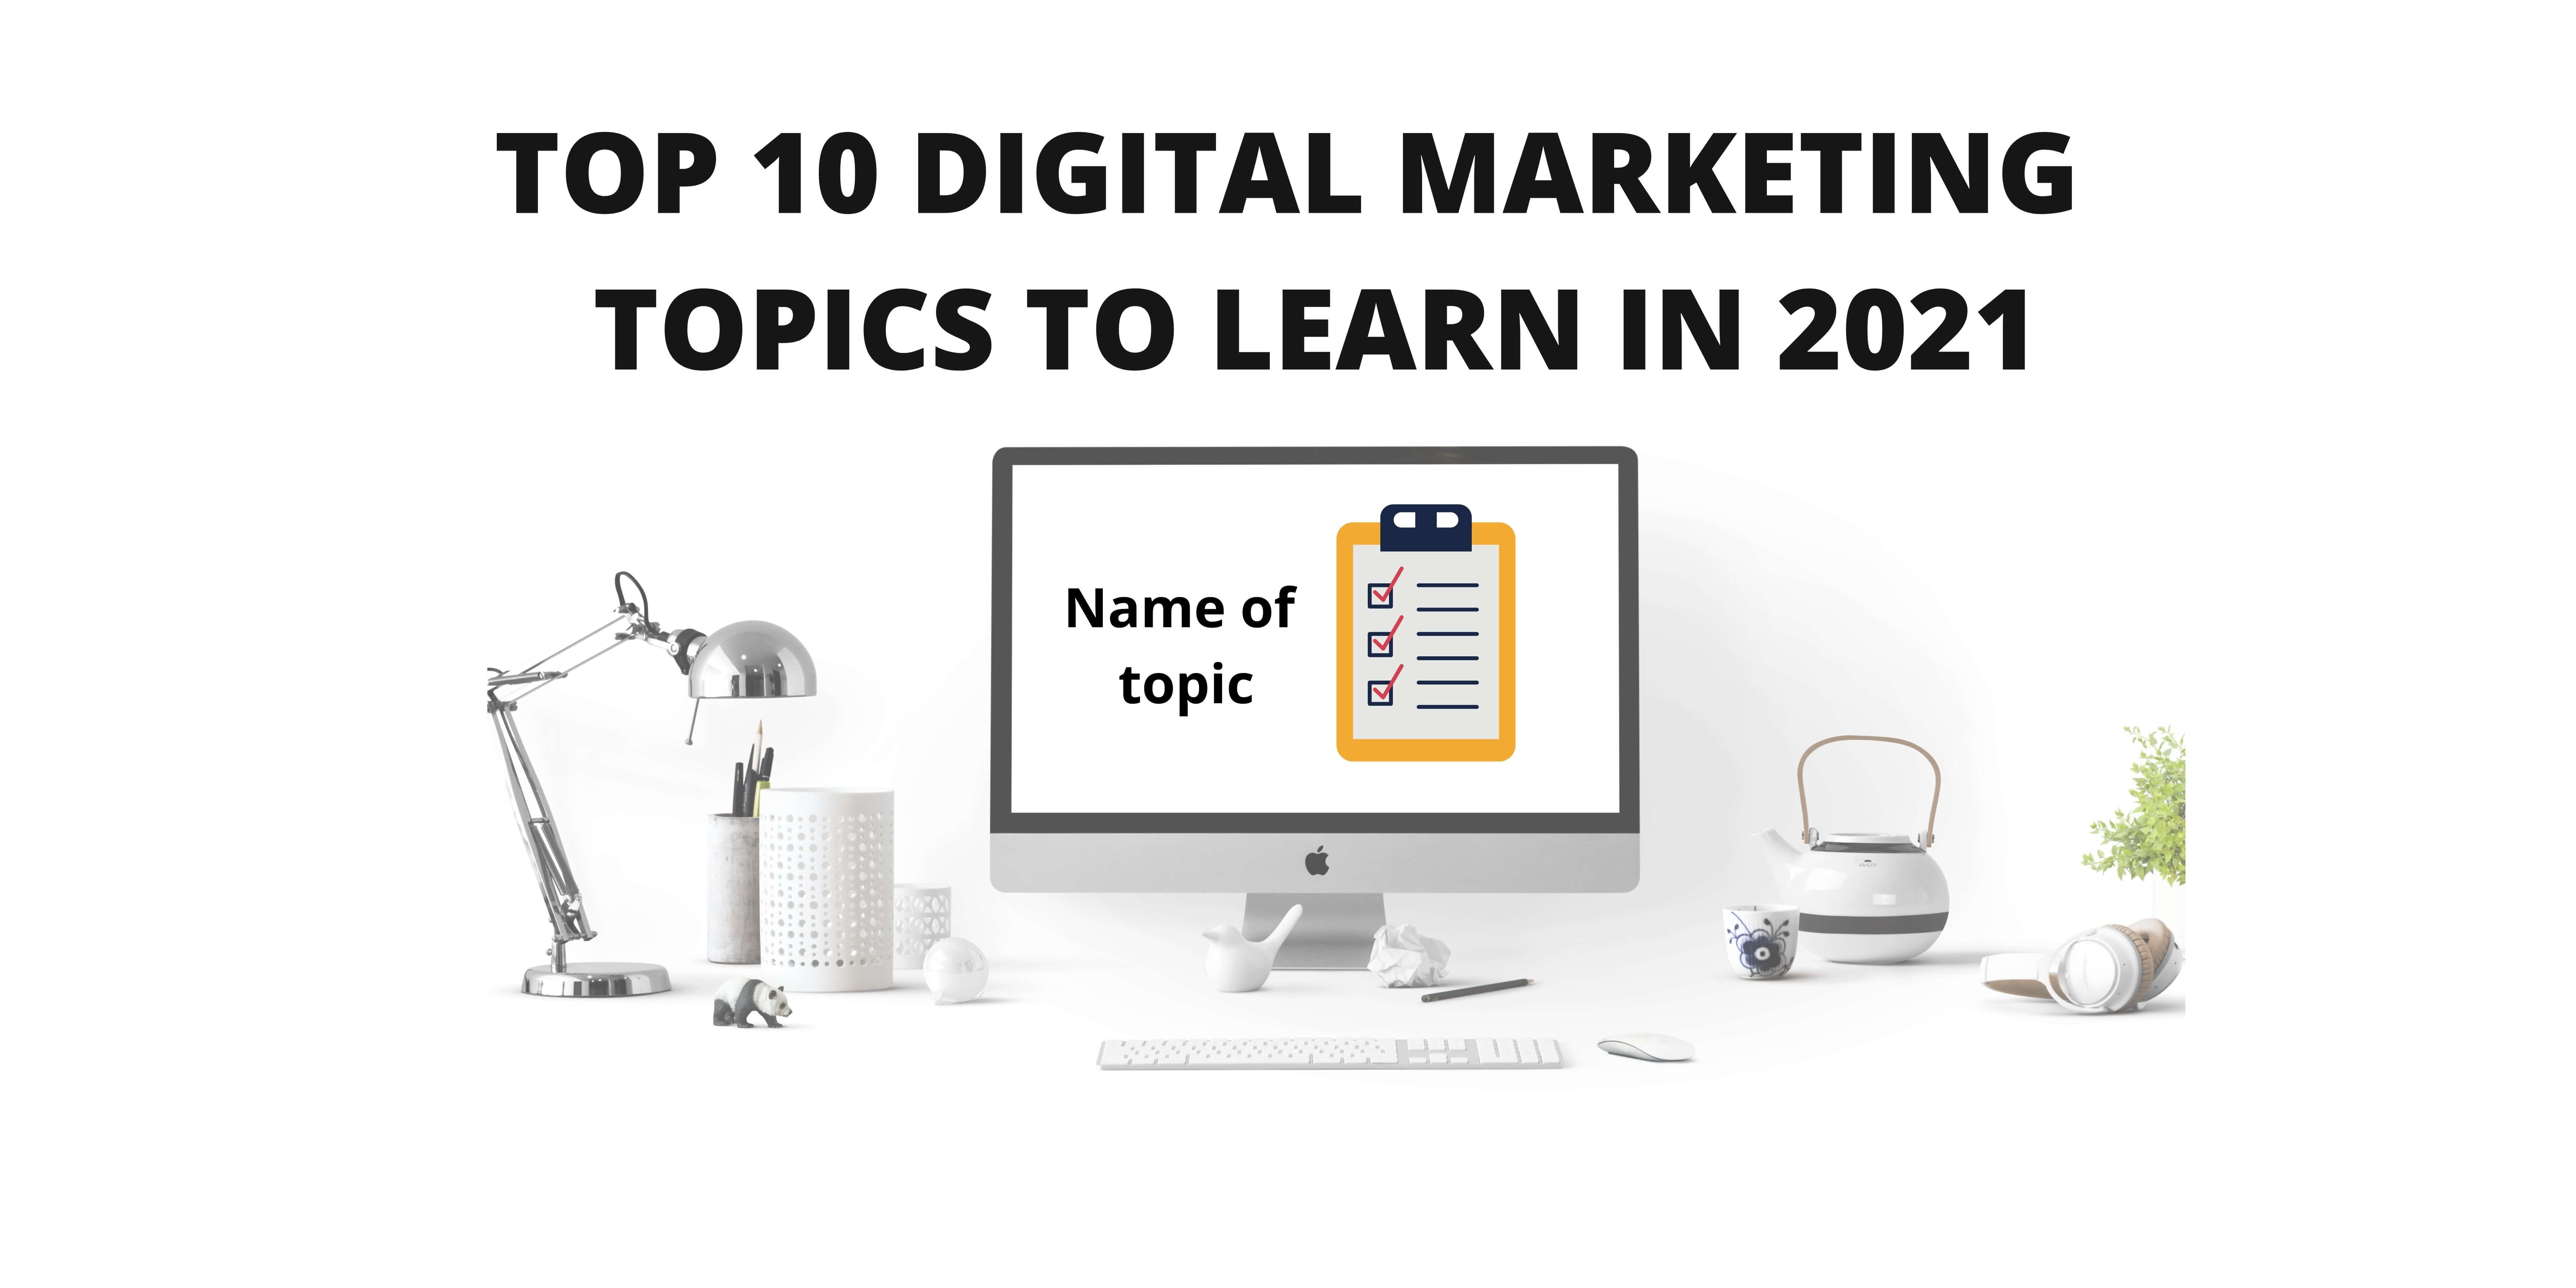 research topics related to digital marketing